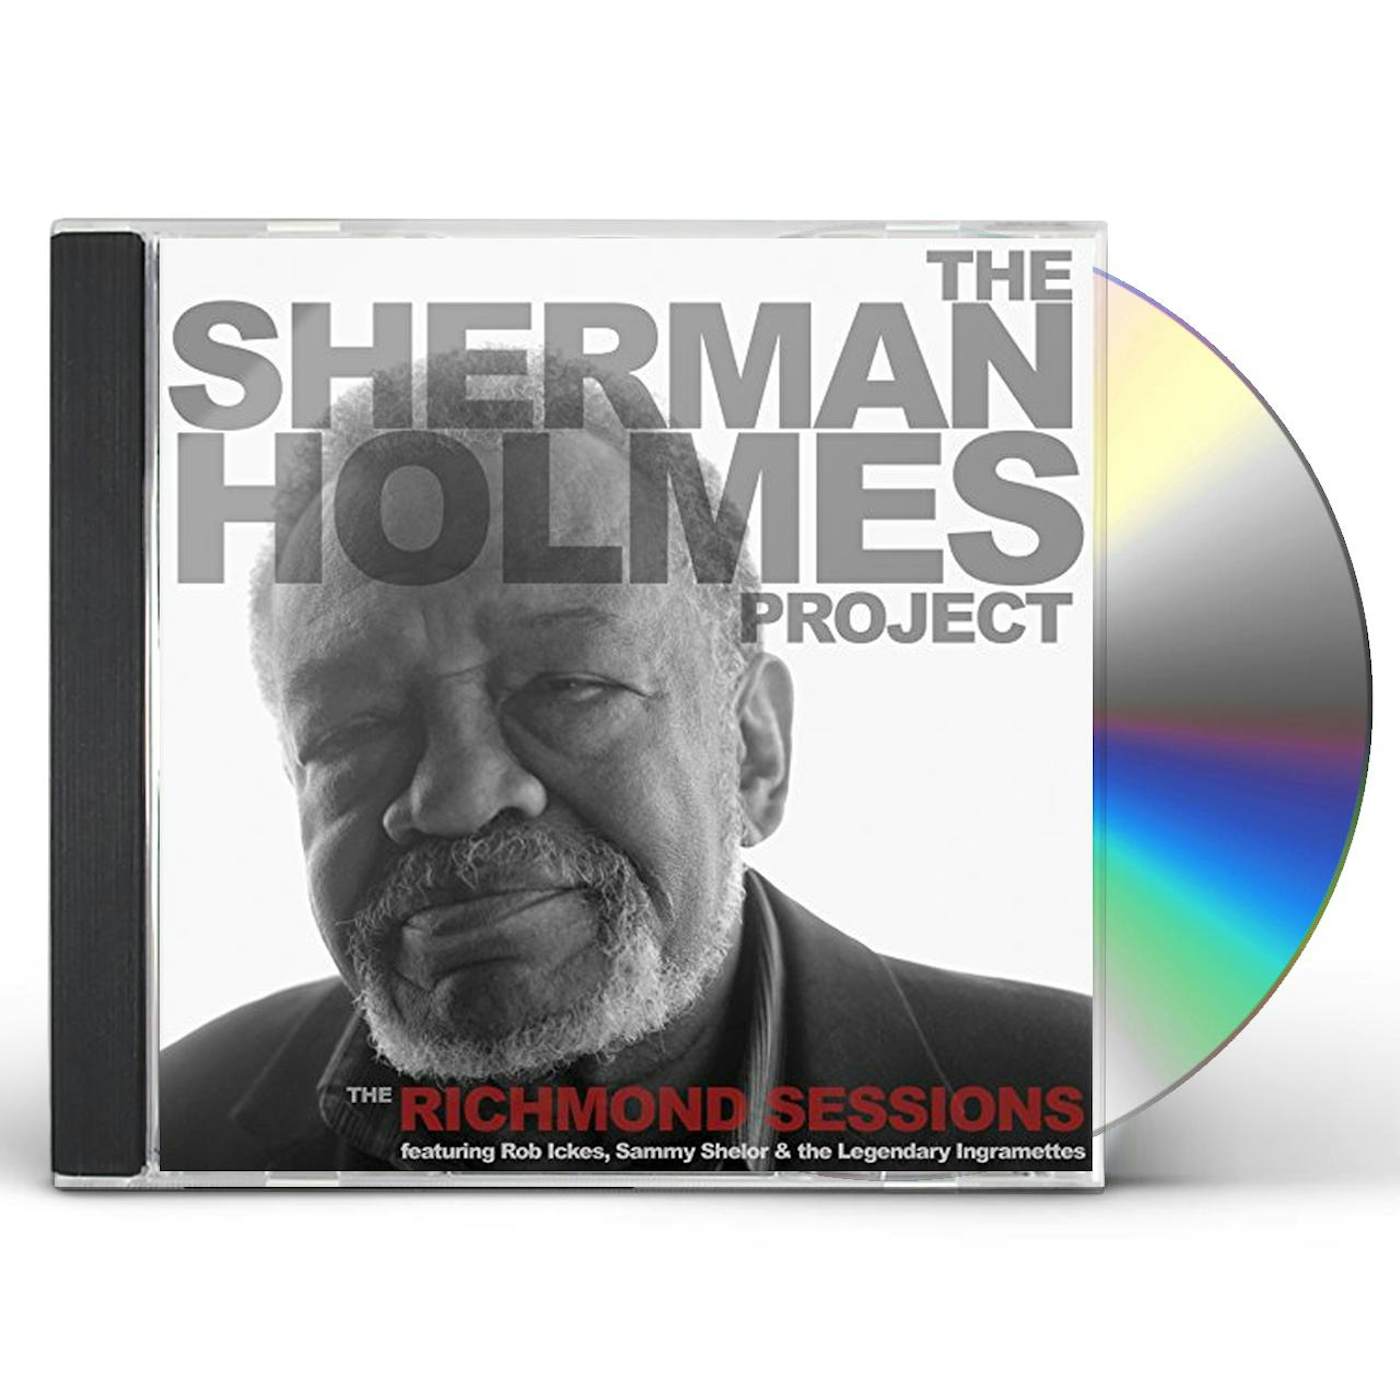 SHERMAN HOLMES PROJECT: THE RICHMOND SESSIONS CD